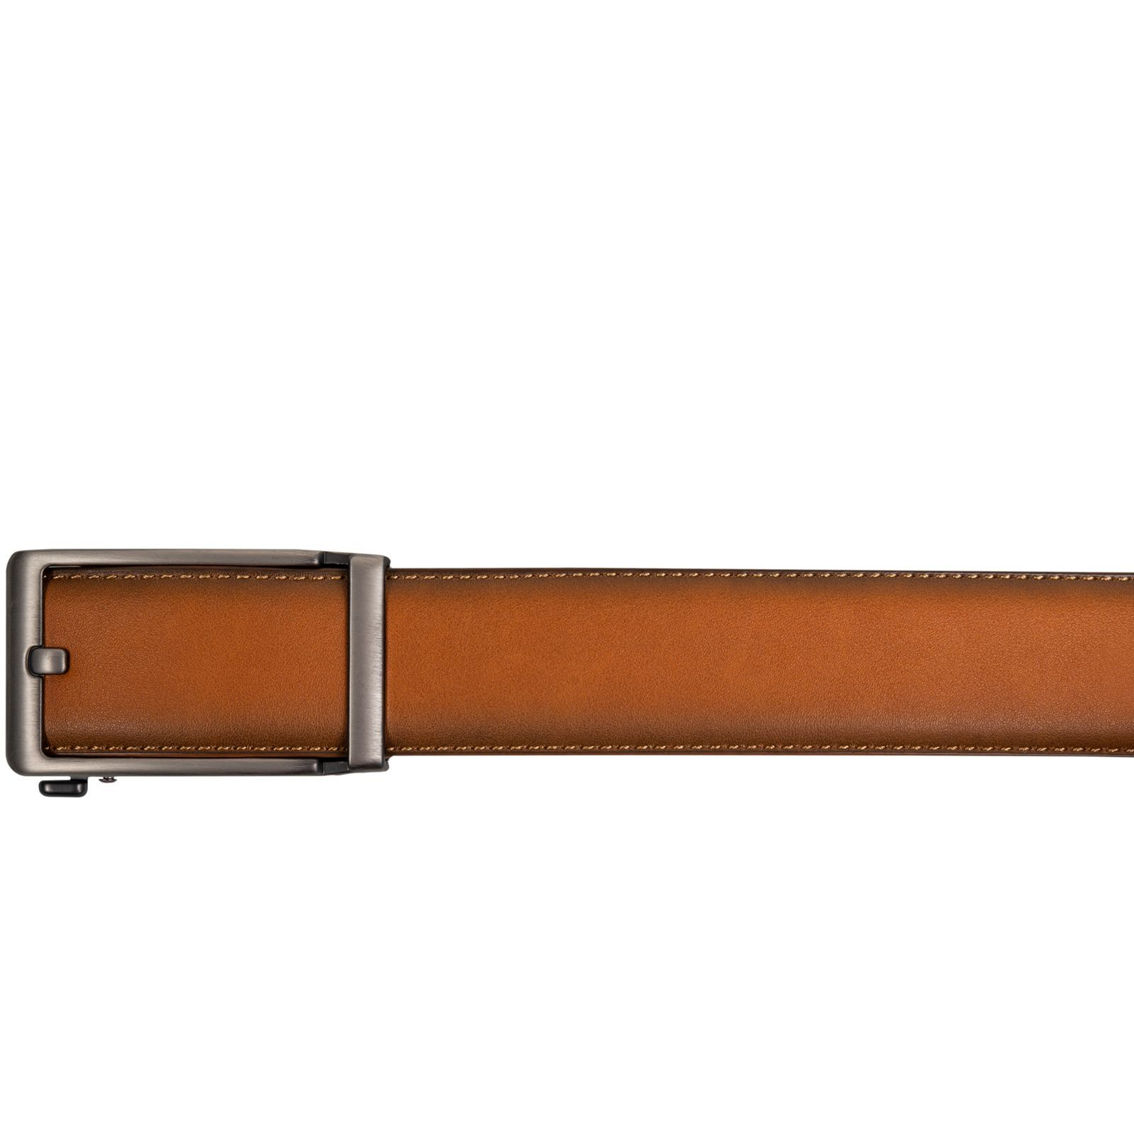 CHAMPS Men's Leather Automatic and Adjustable Belt, Tan - Image 2 of 5